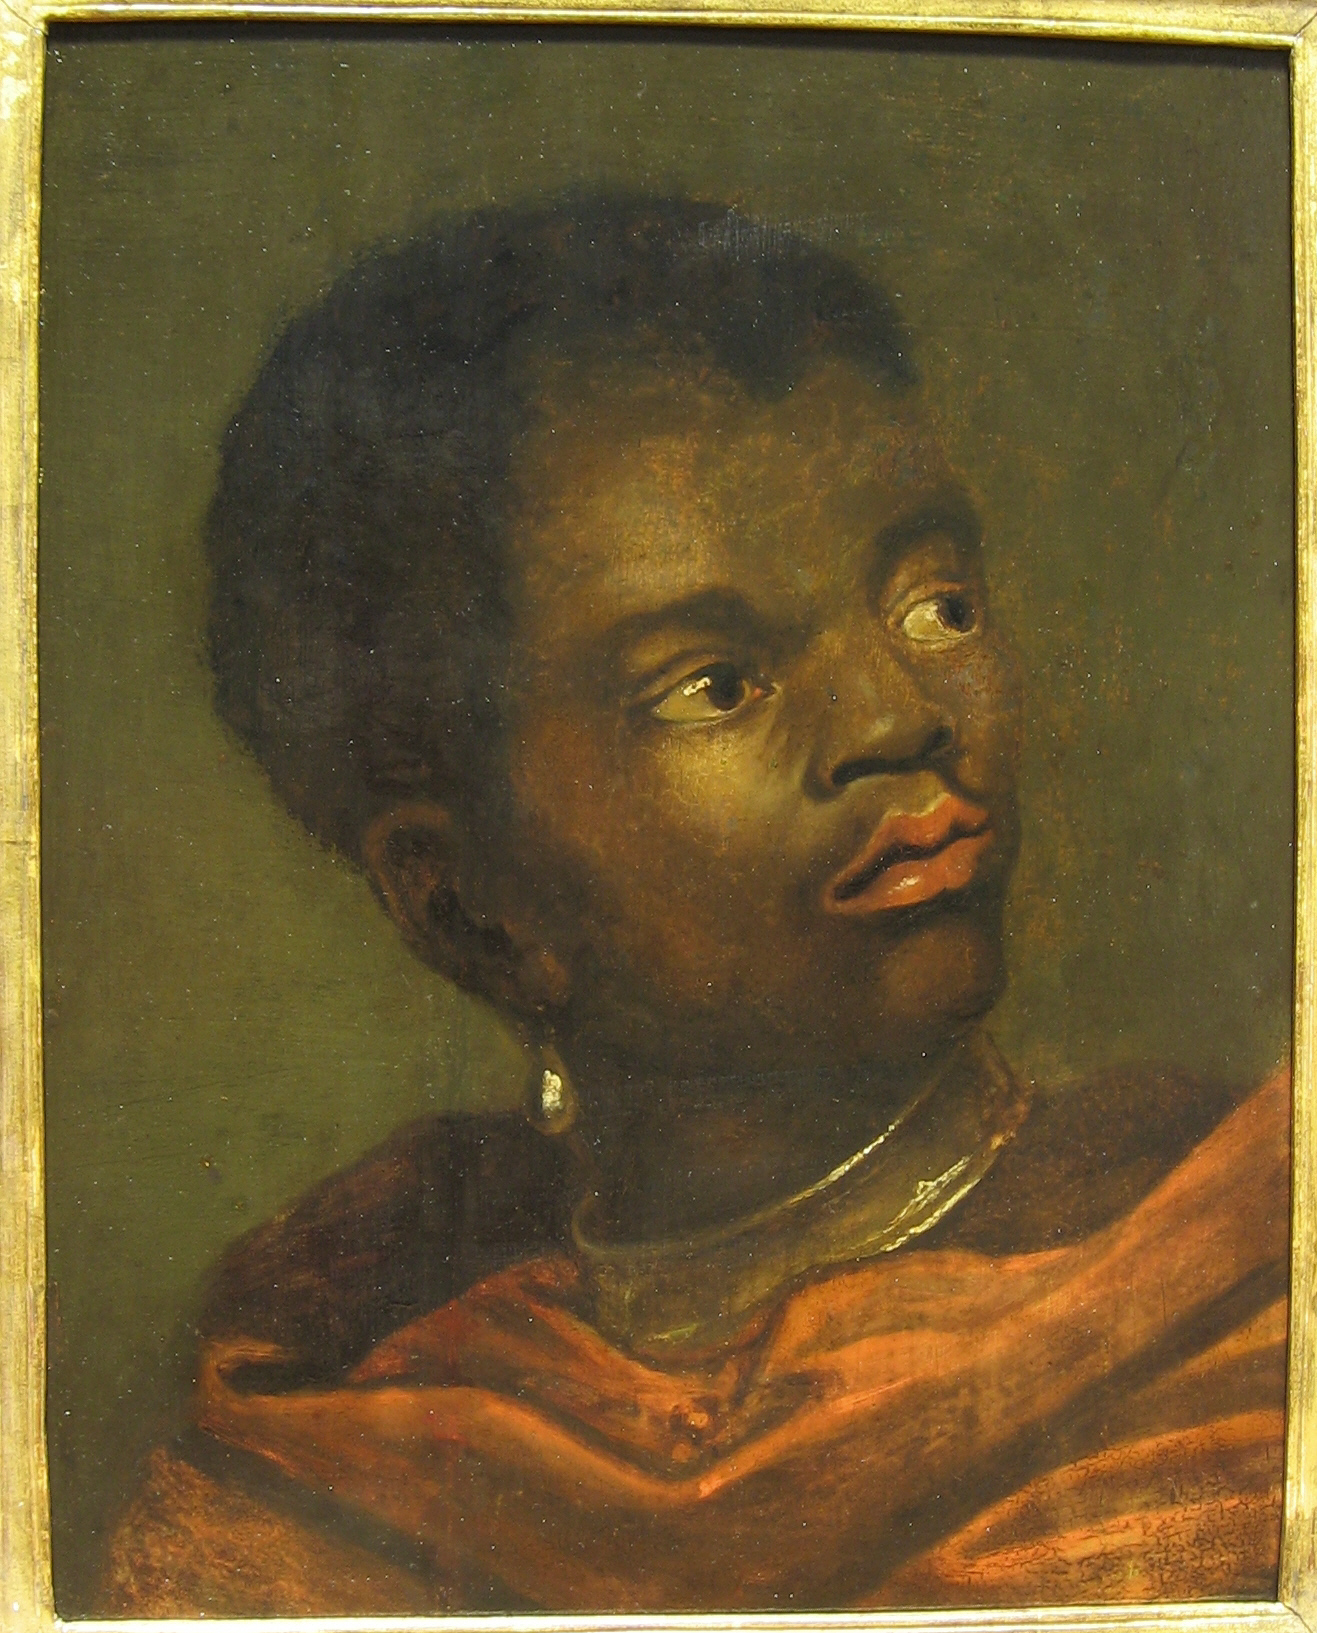 https://upload.wikimedia.org/wikipedia/commons/4/4e/Dutch%2C_17th_century%2C_Black_boy_with_slave_collar%2C_Private_Collection.jpg